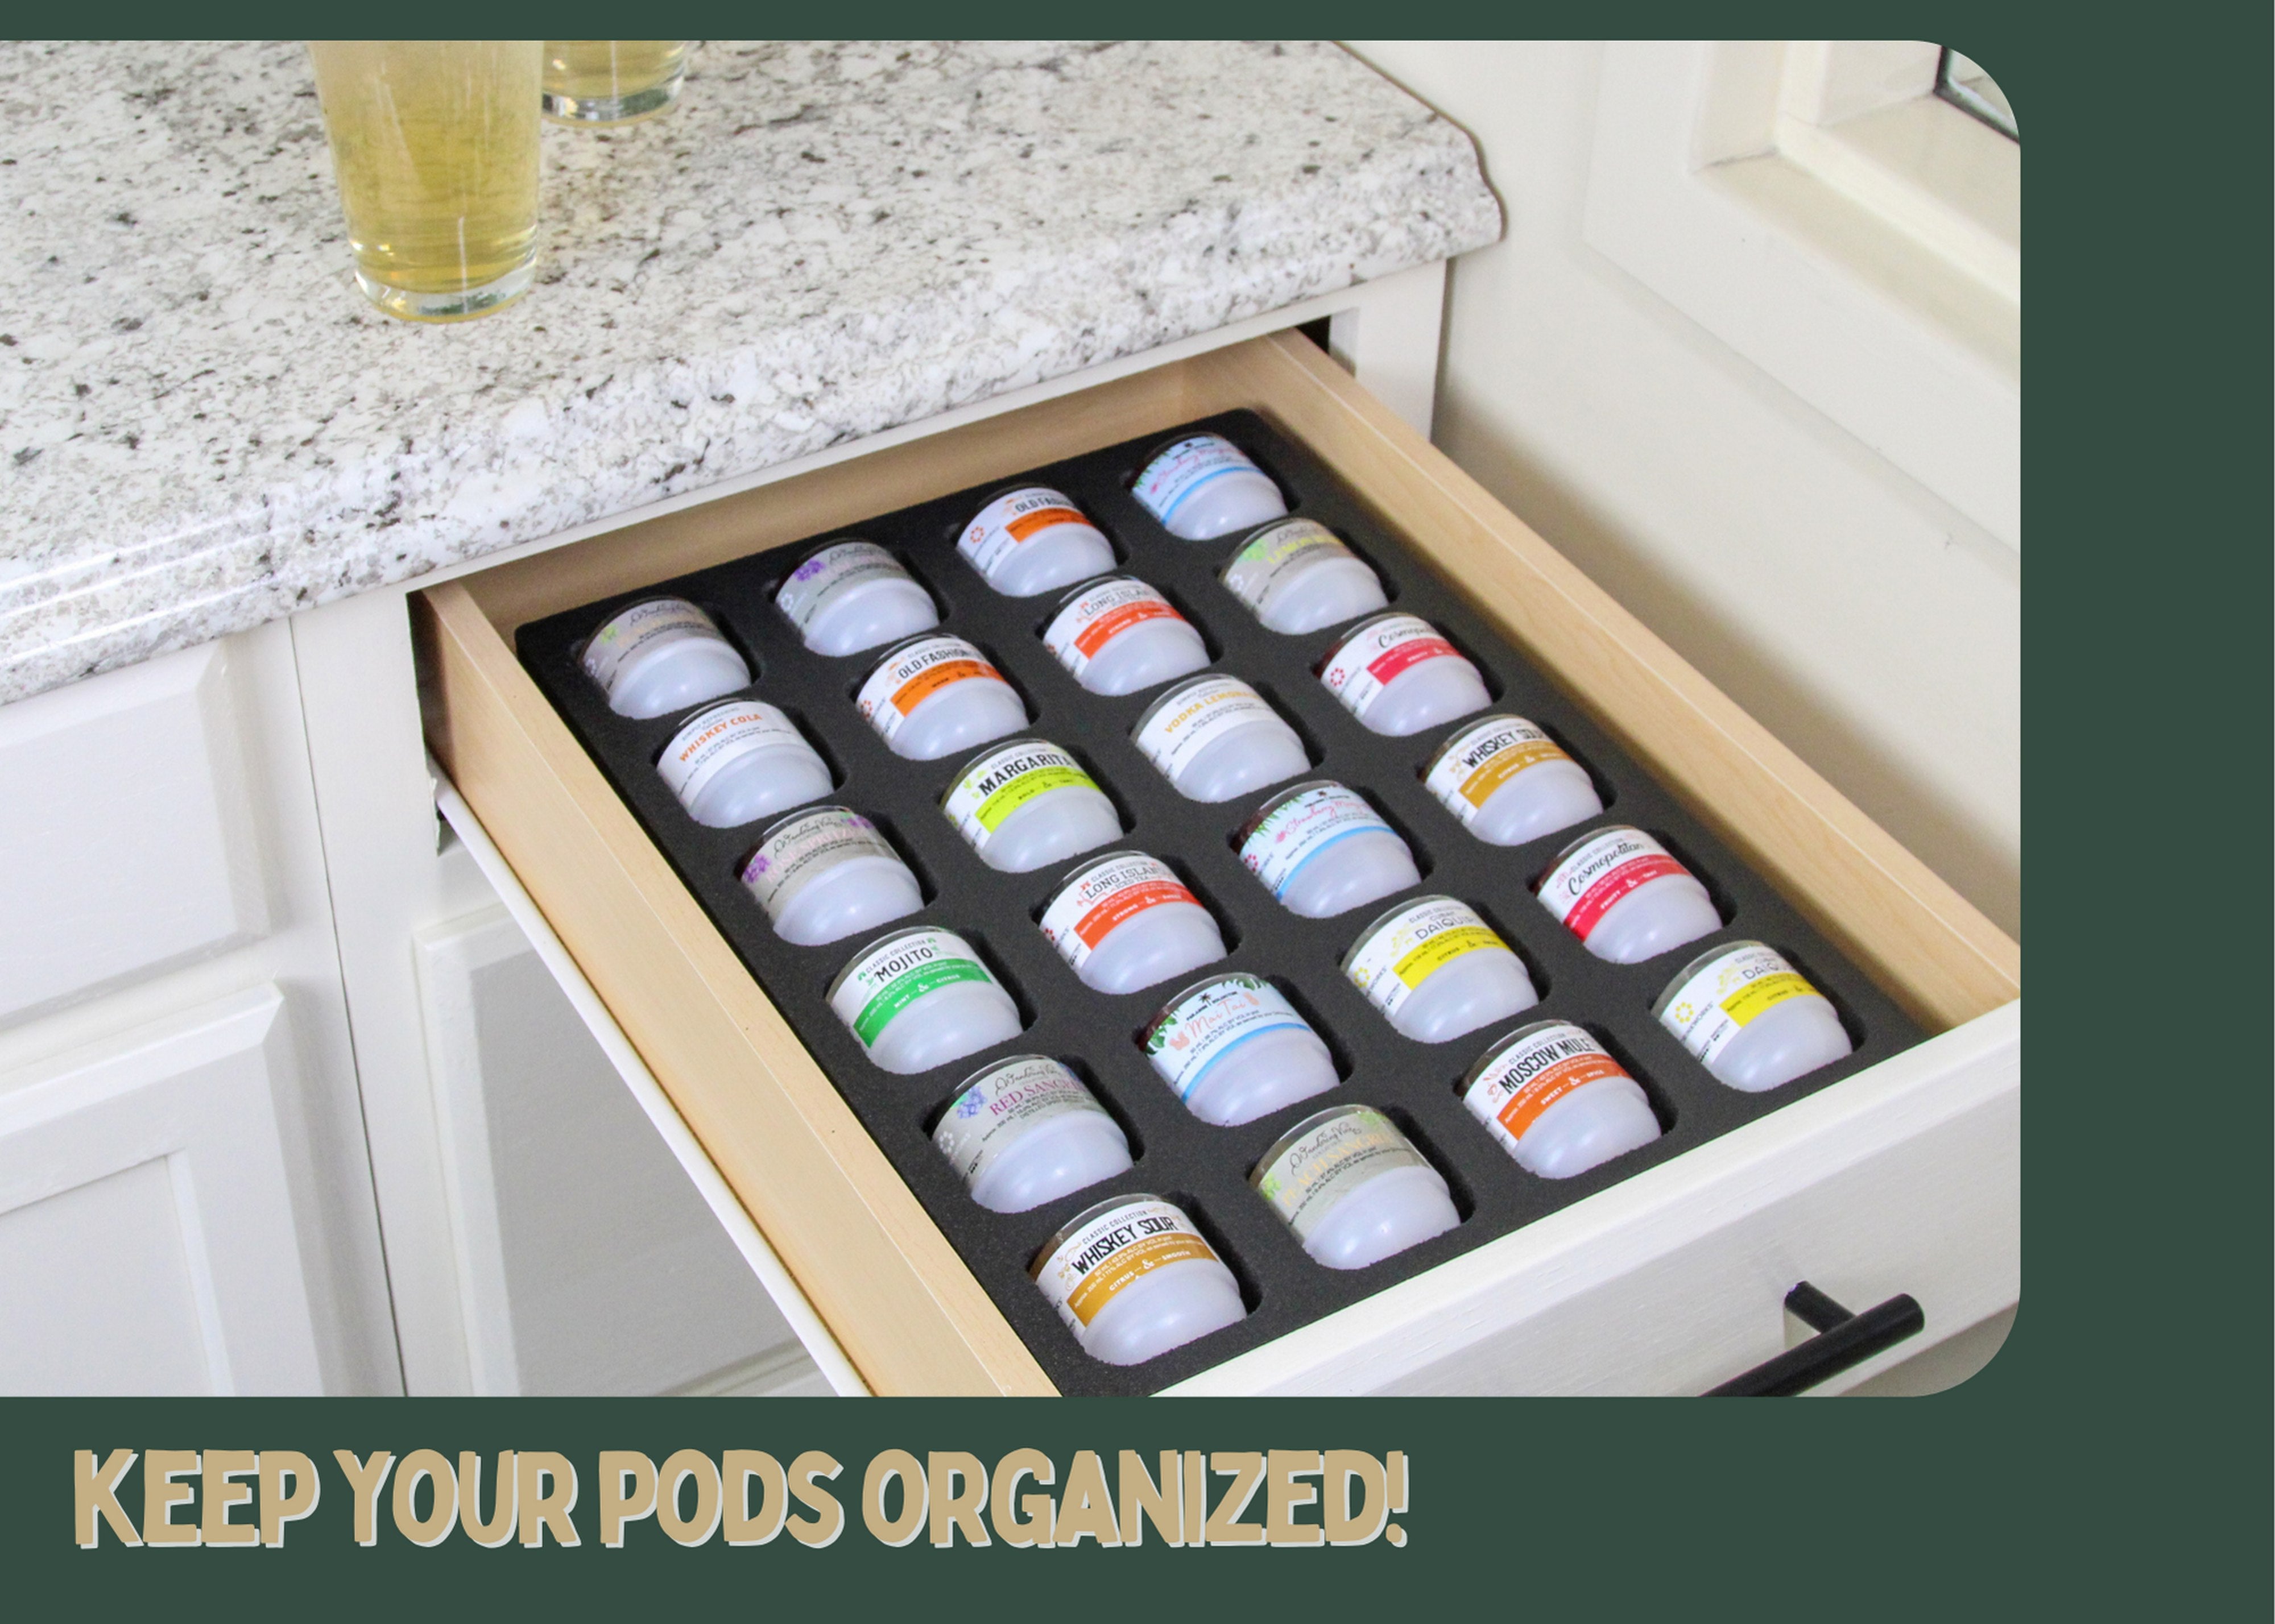 Cocktail Capsule Drawer Tray Insert Compatible Keurig DrinkWorks Pods for Kitchen Home Bar Party Waterproof Foam 24 Compartment 11.9 x 15.9 Inches